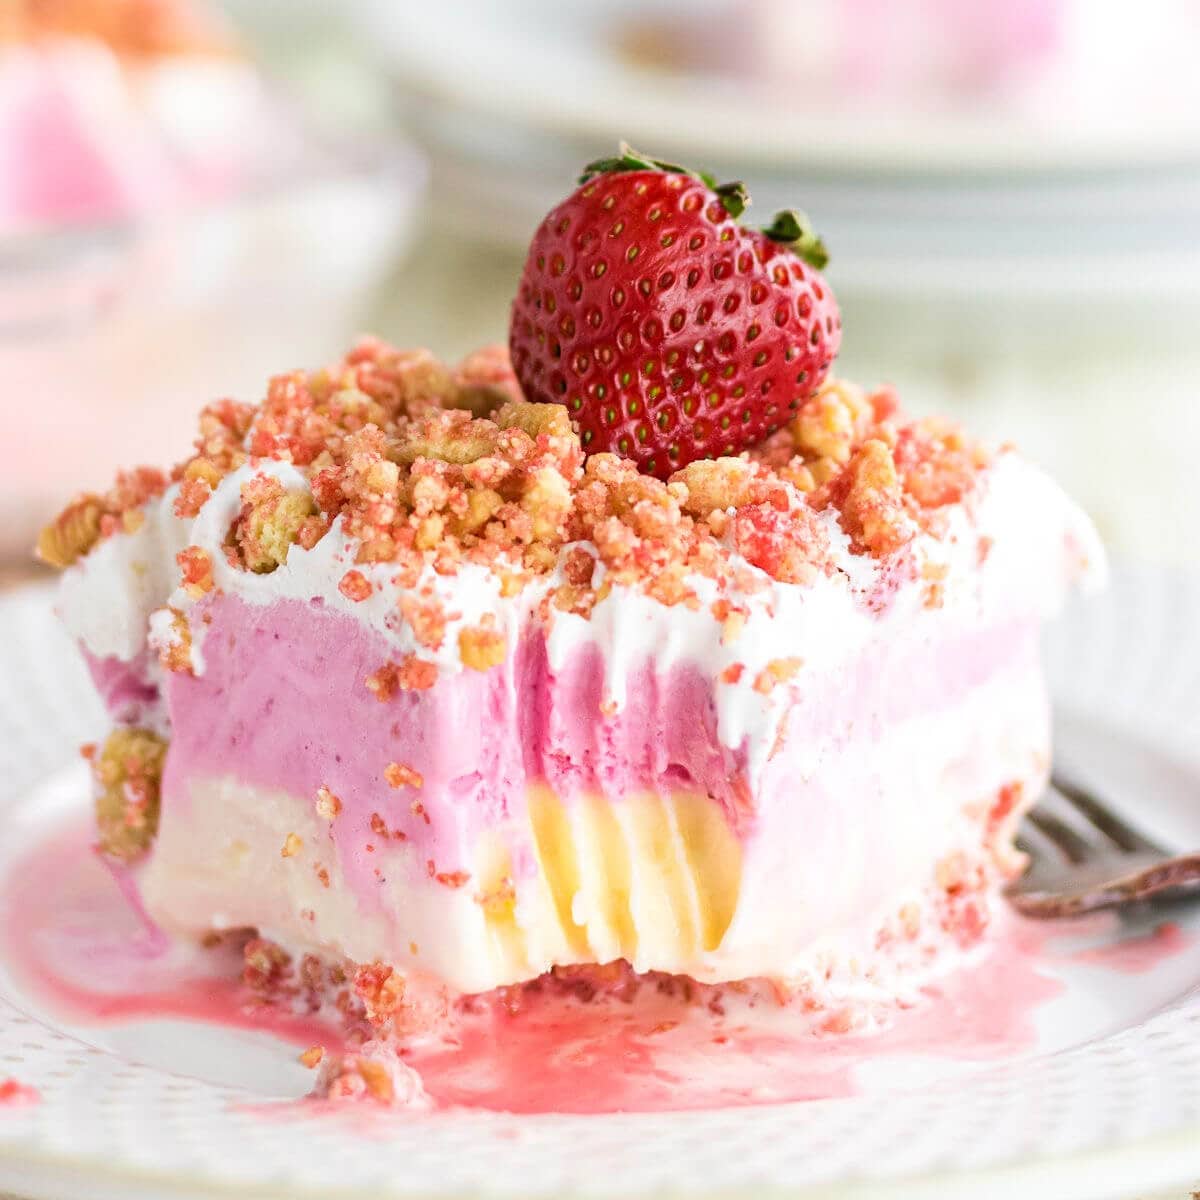 A slice of pink strawberry ice cream cake on a plate.